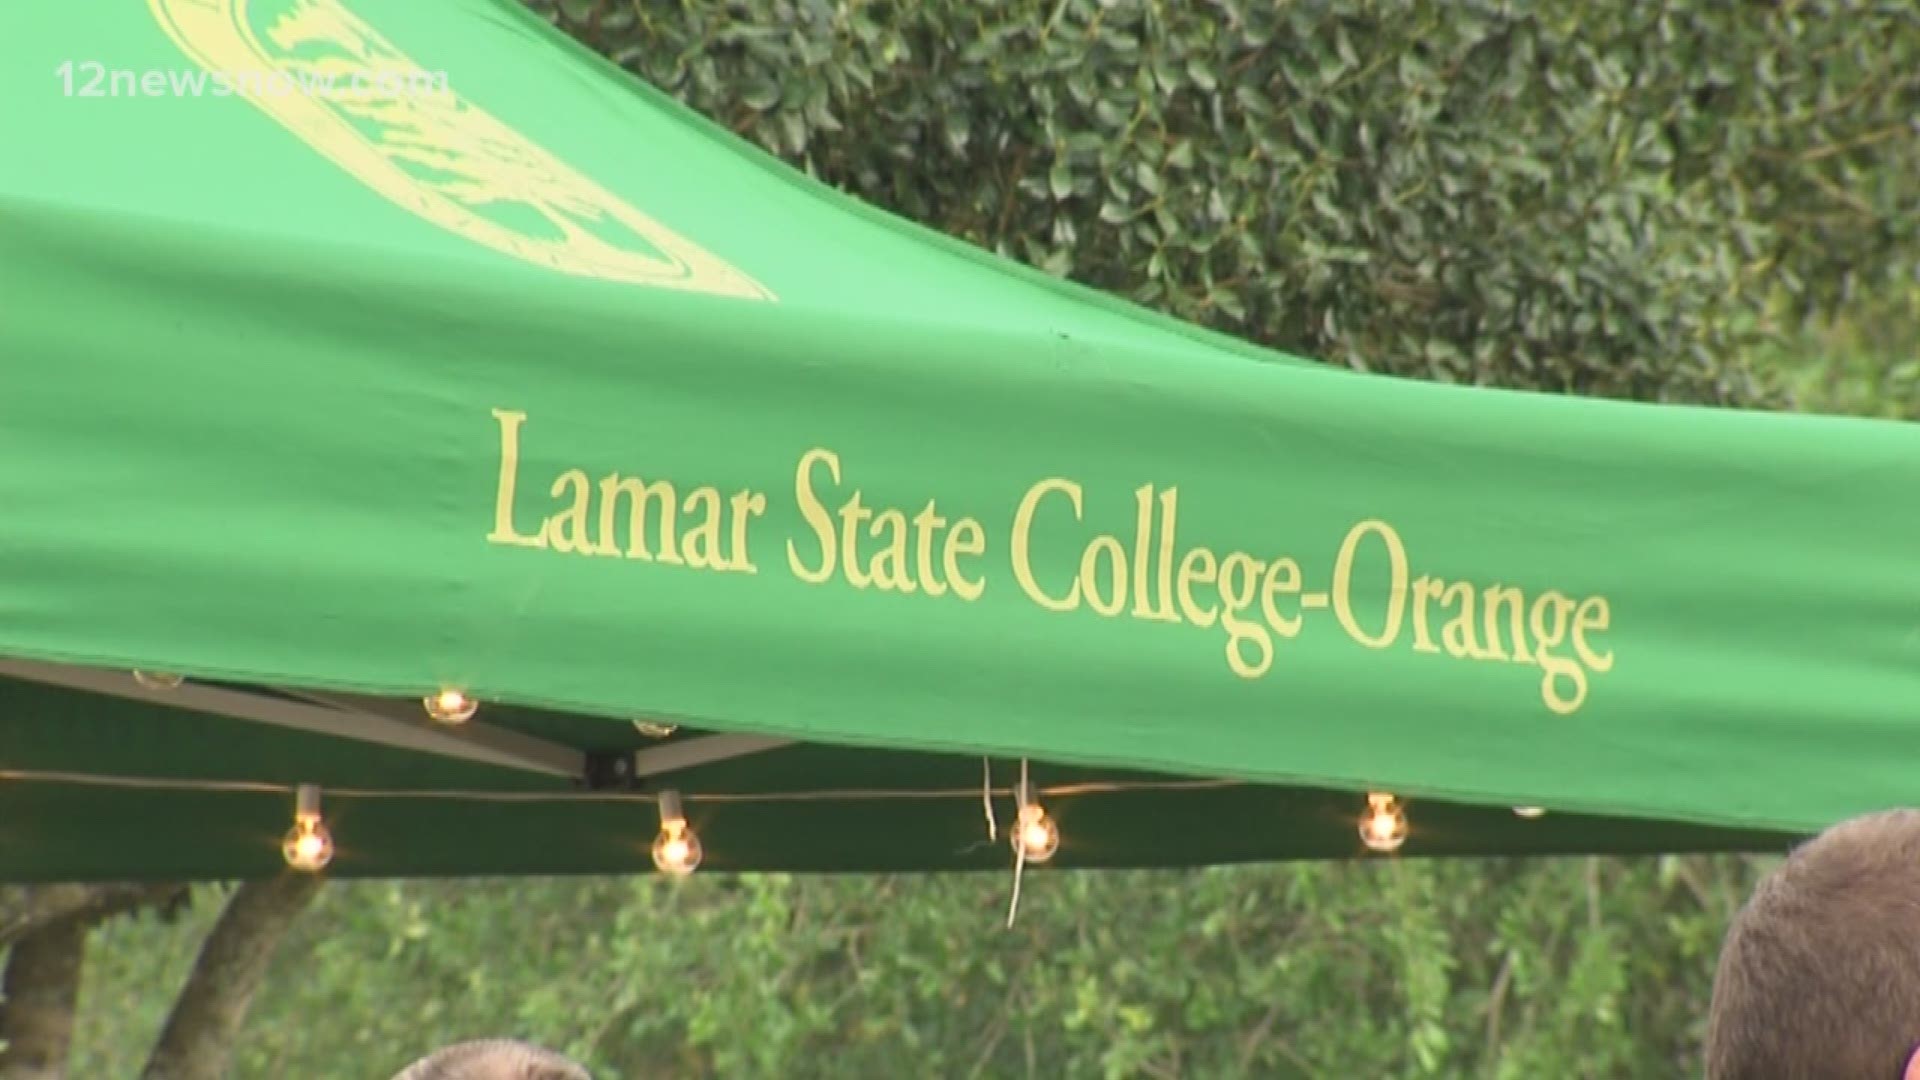 Lamar State College-Orange Foundation holds its largest fundraiser of the year.